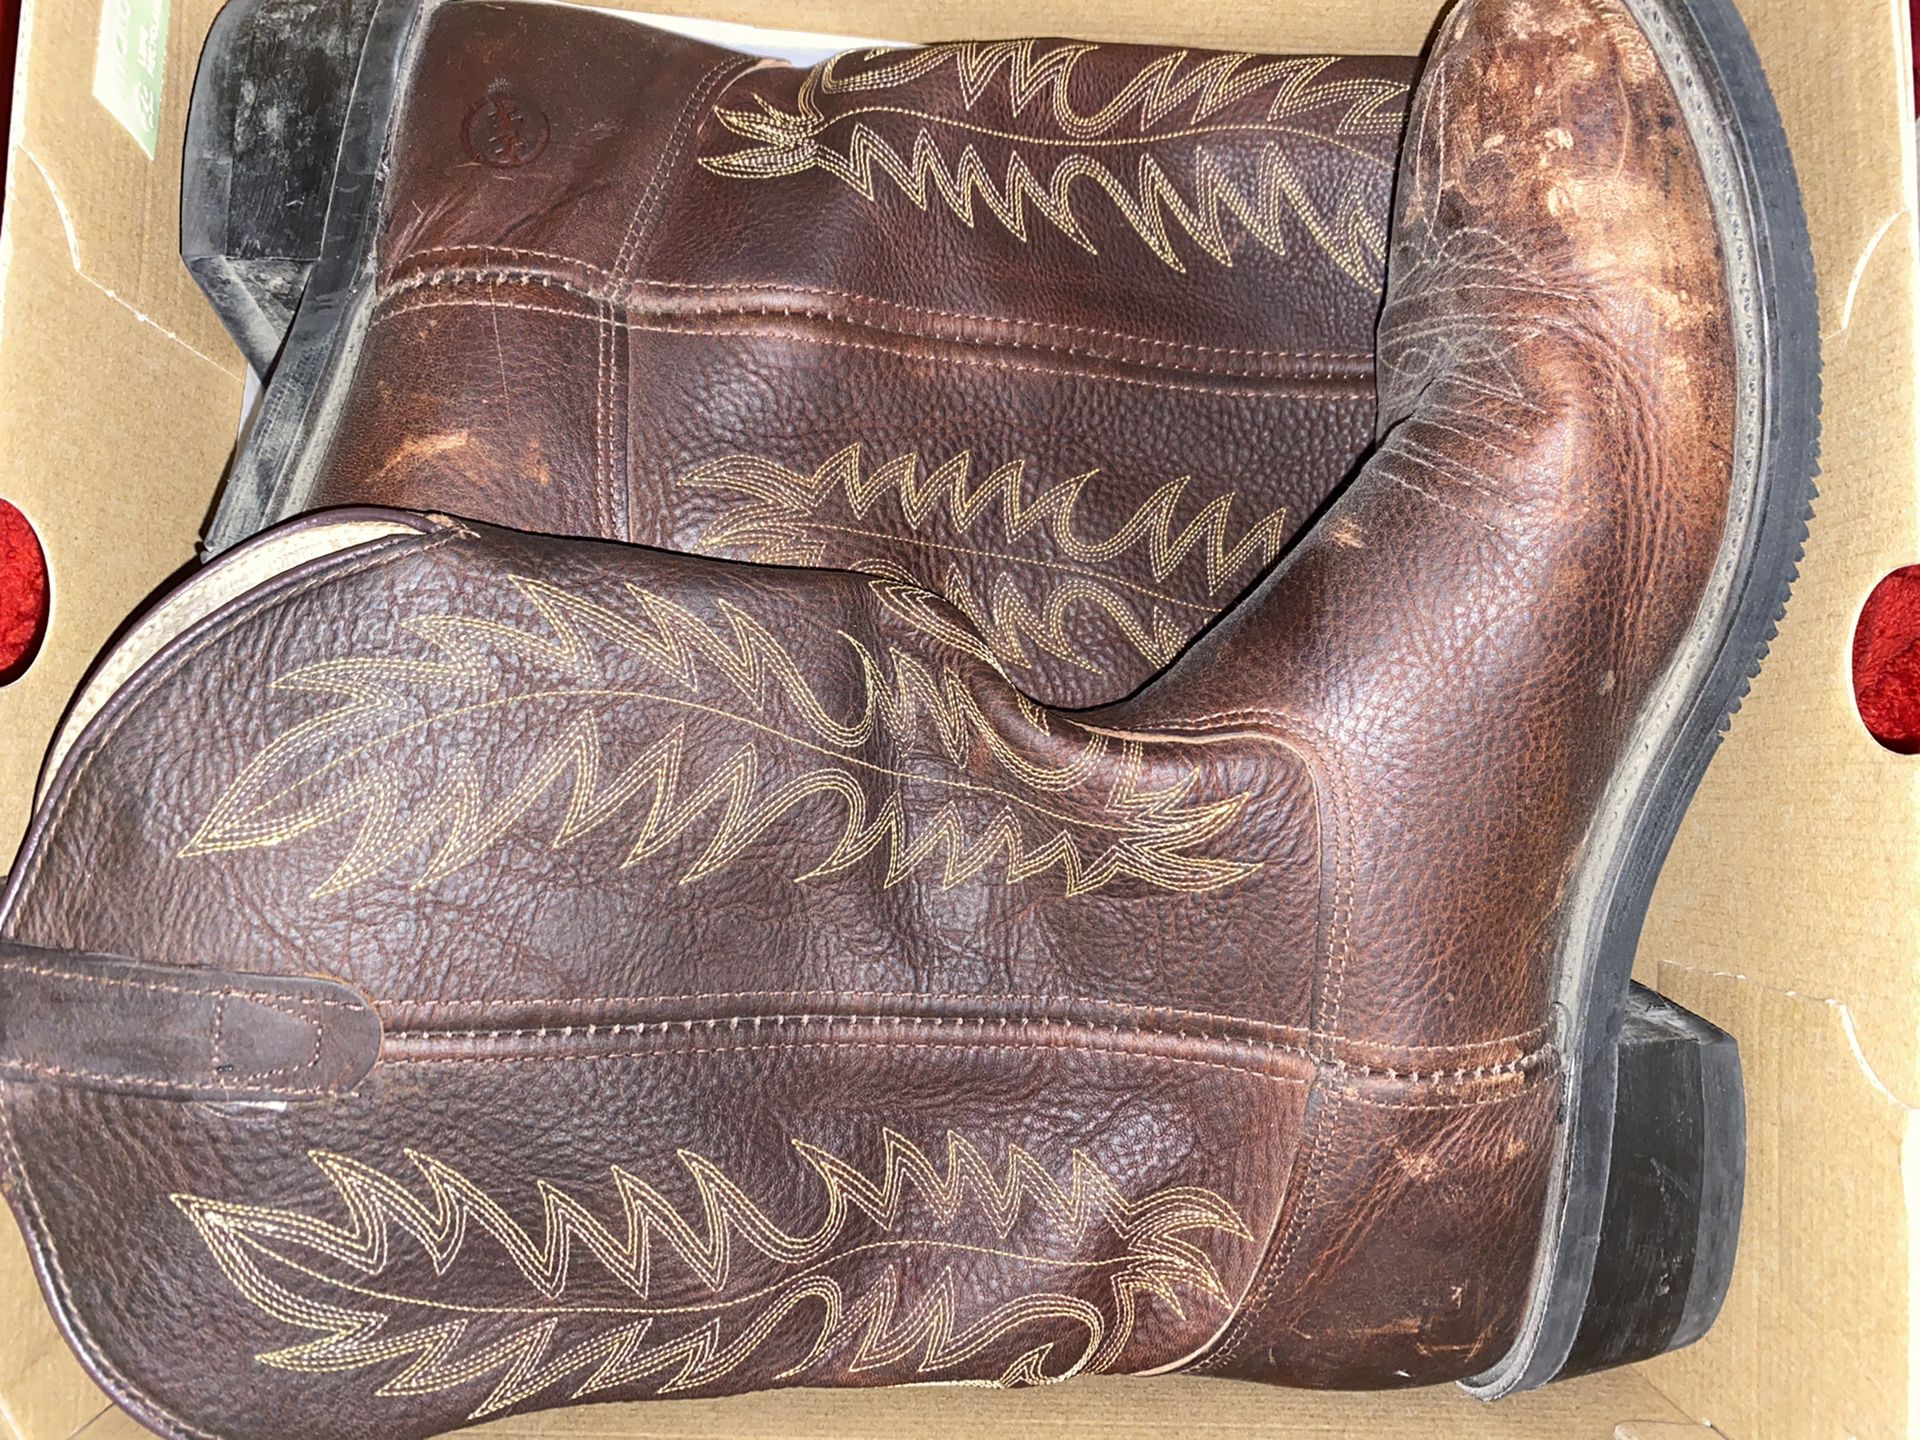 Double H work western boots